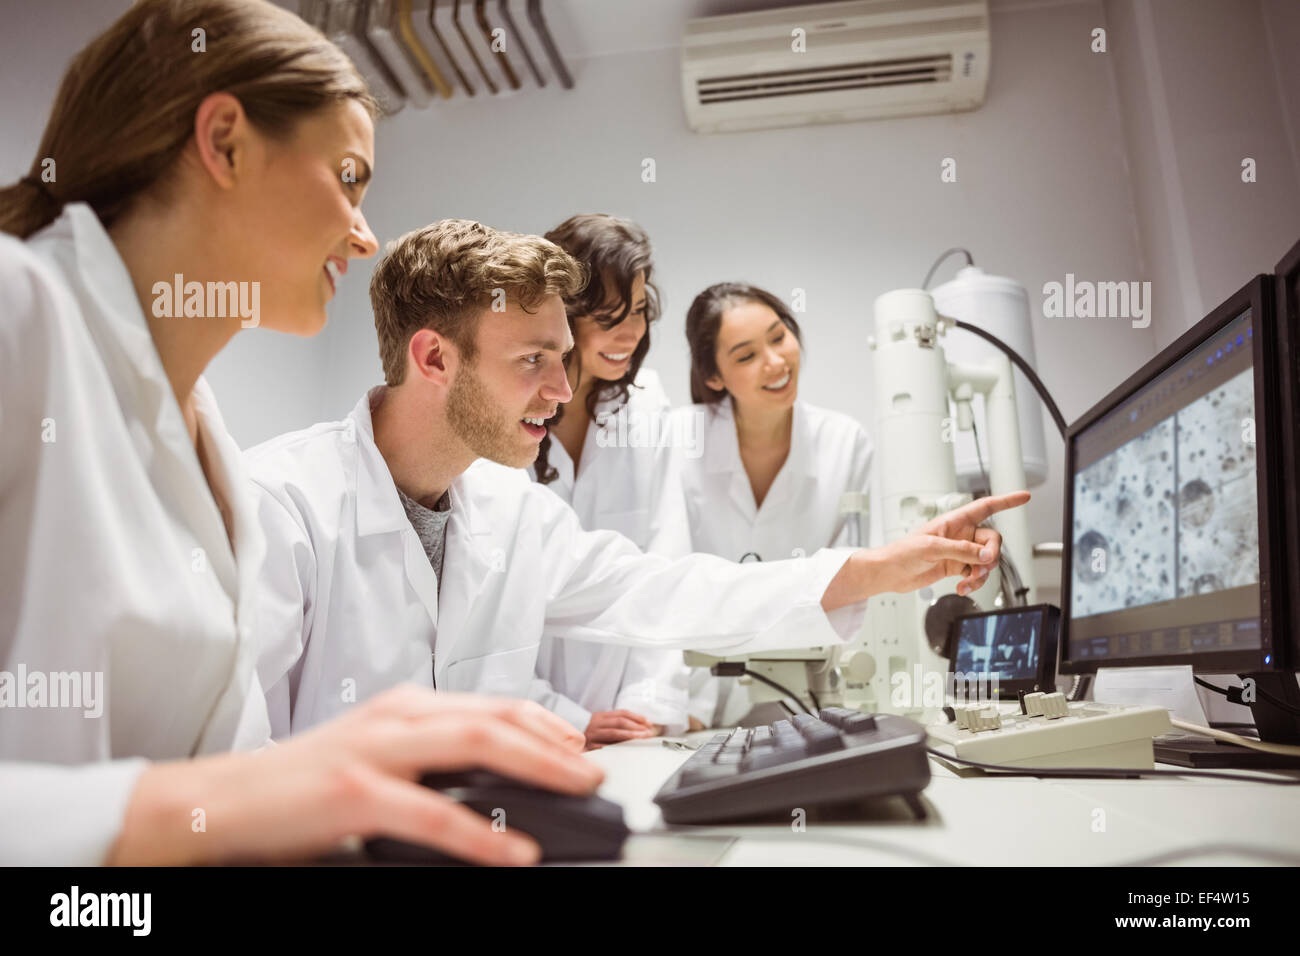 Science students looking at microscopic image on computer Stock Photo